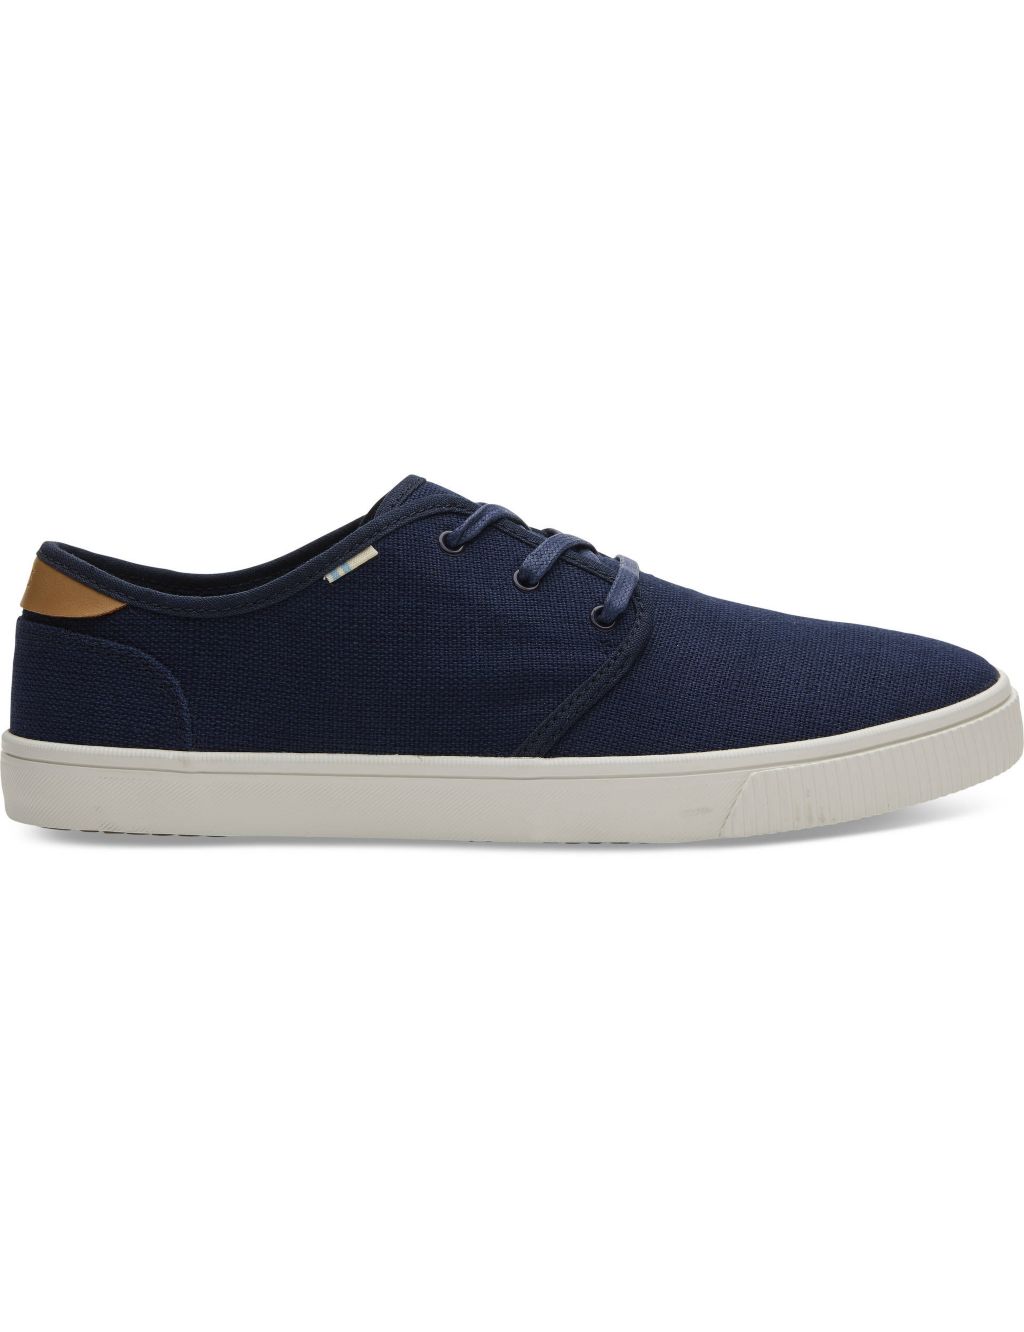 Canvas Lace Up Trainers image 1